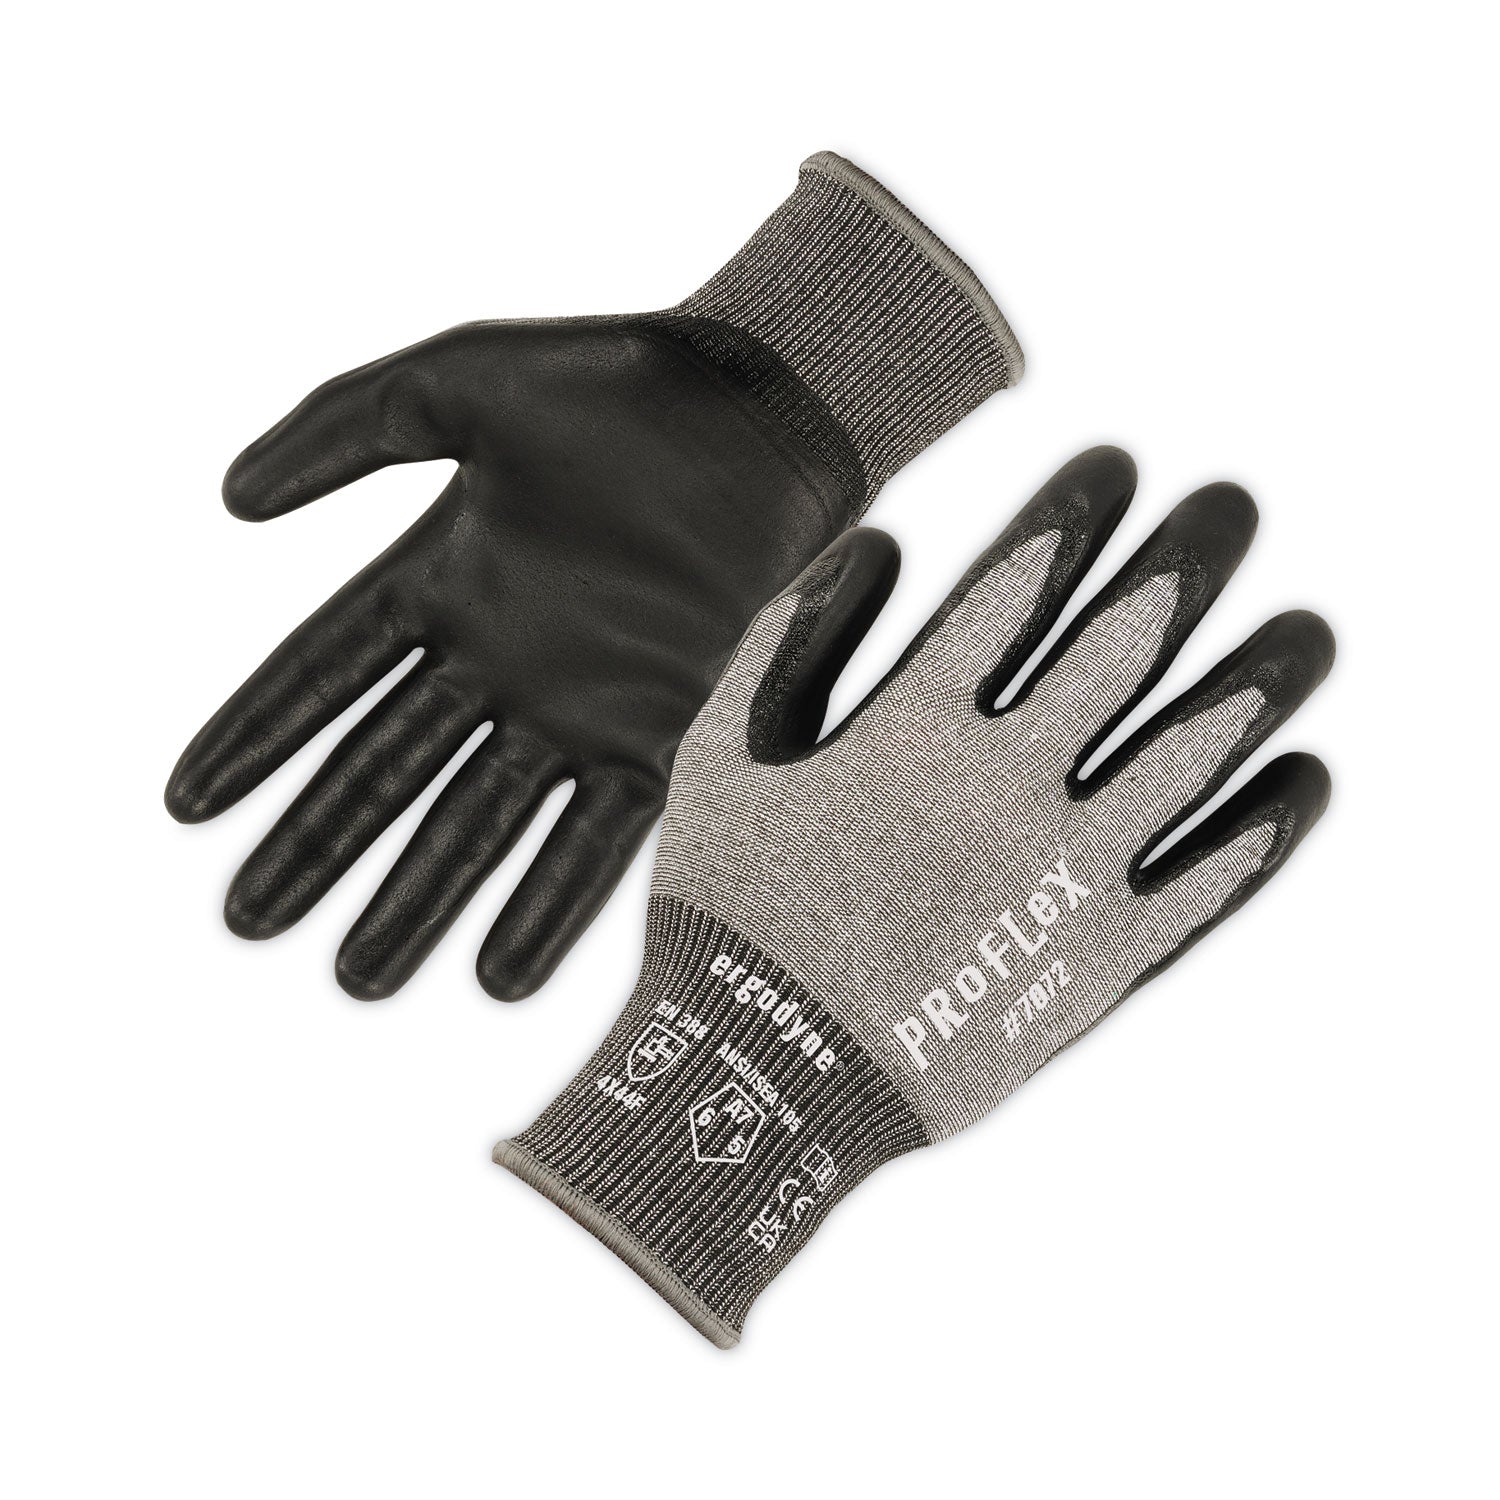 proflex-7072-ansi-a7-nitrile-coated-cr-gloves-gray-2x-large-pair-ships-in-1-3-business-days_ego10316 - 1